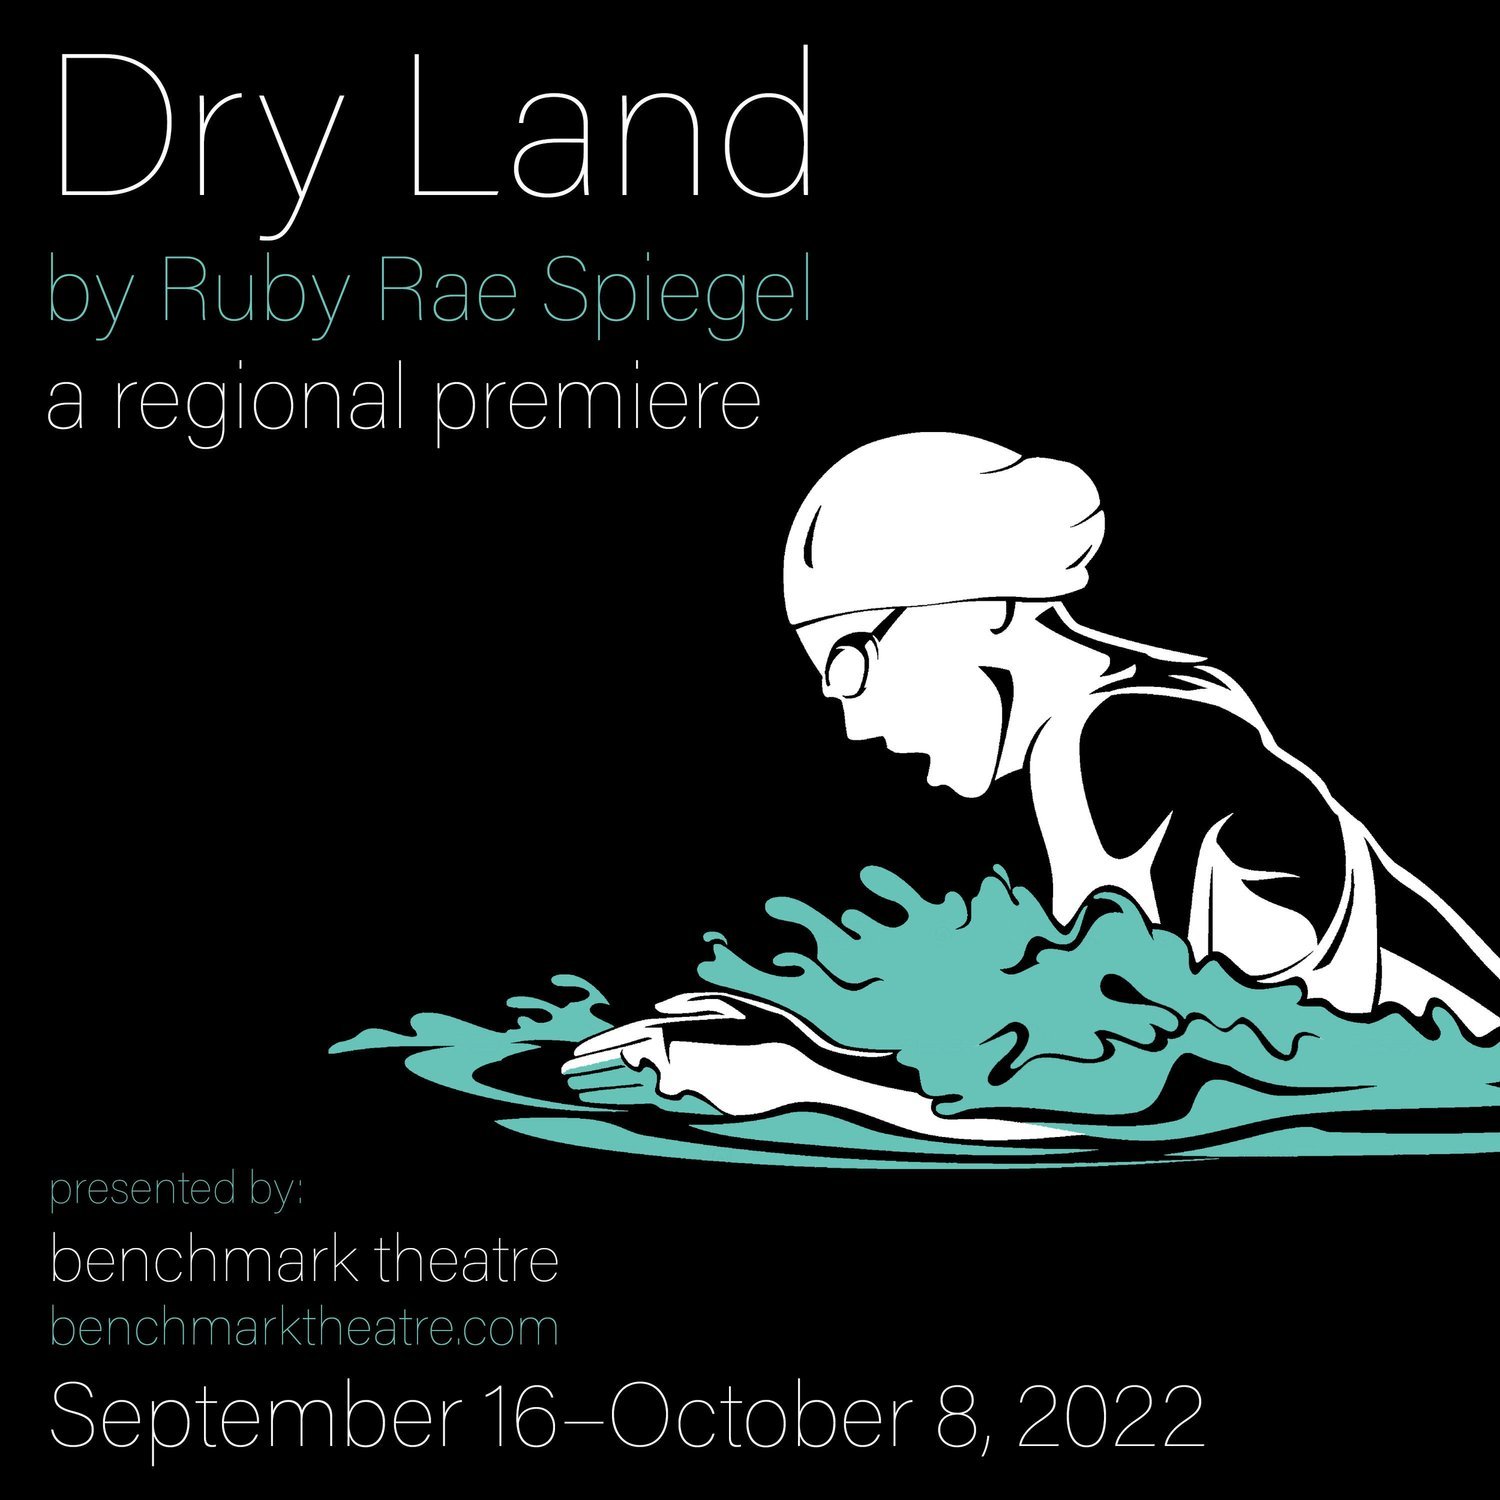 Benchmark Theatre in Lakewood is performing the regional premiere of Dry Land in Colorado. Shows are Thursdays, Fridays and Saturdays at 8 p.m. with additional Sunday matinees at 2 p.m.